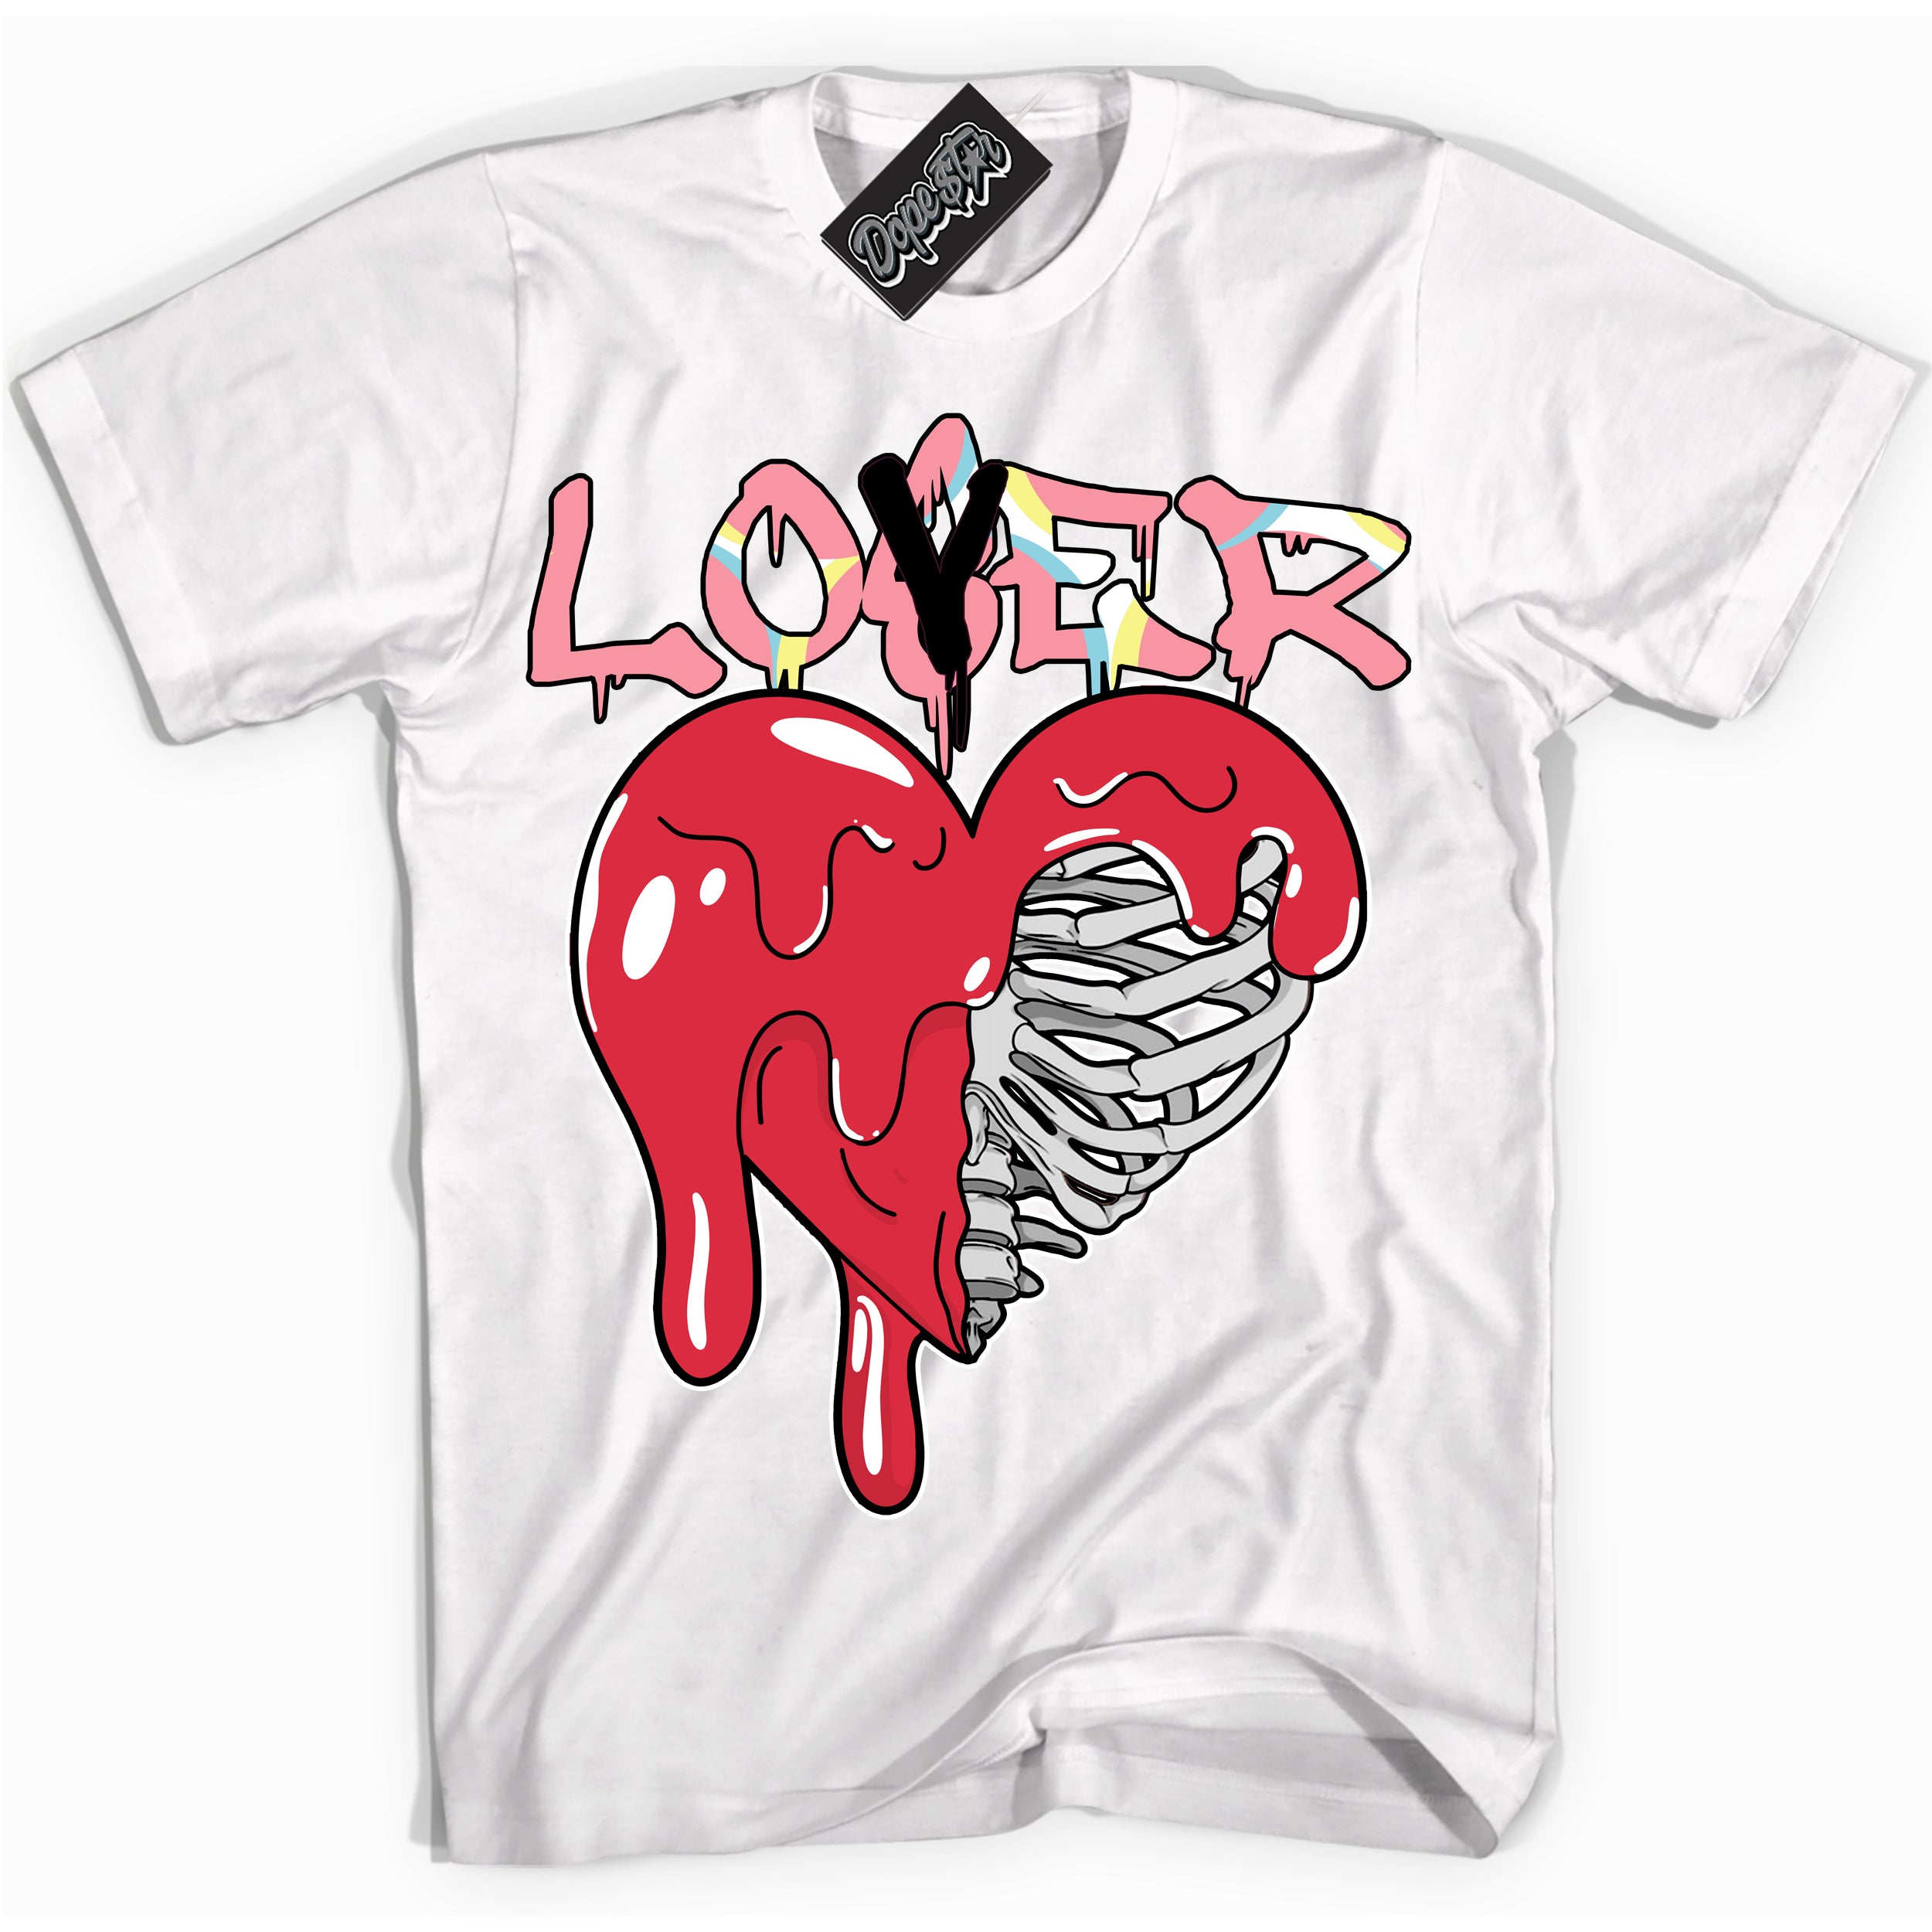 Cool White graphic tee with “ Lover Loser ” design, that perfectly matches Spider-Verse 1s sneakers 